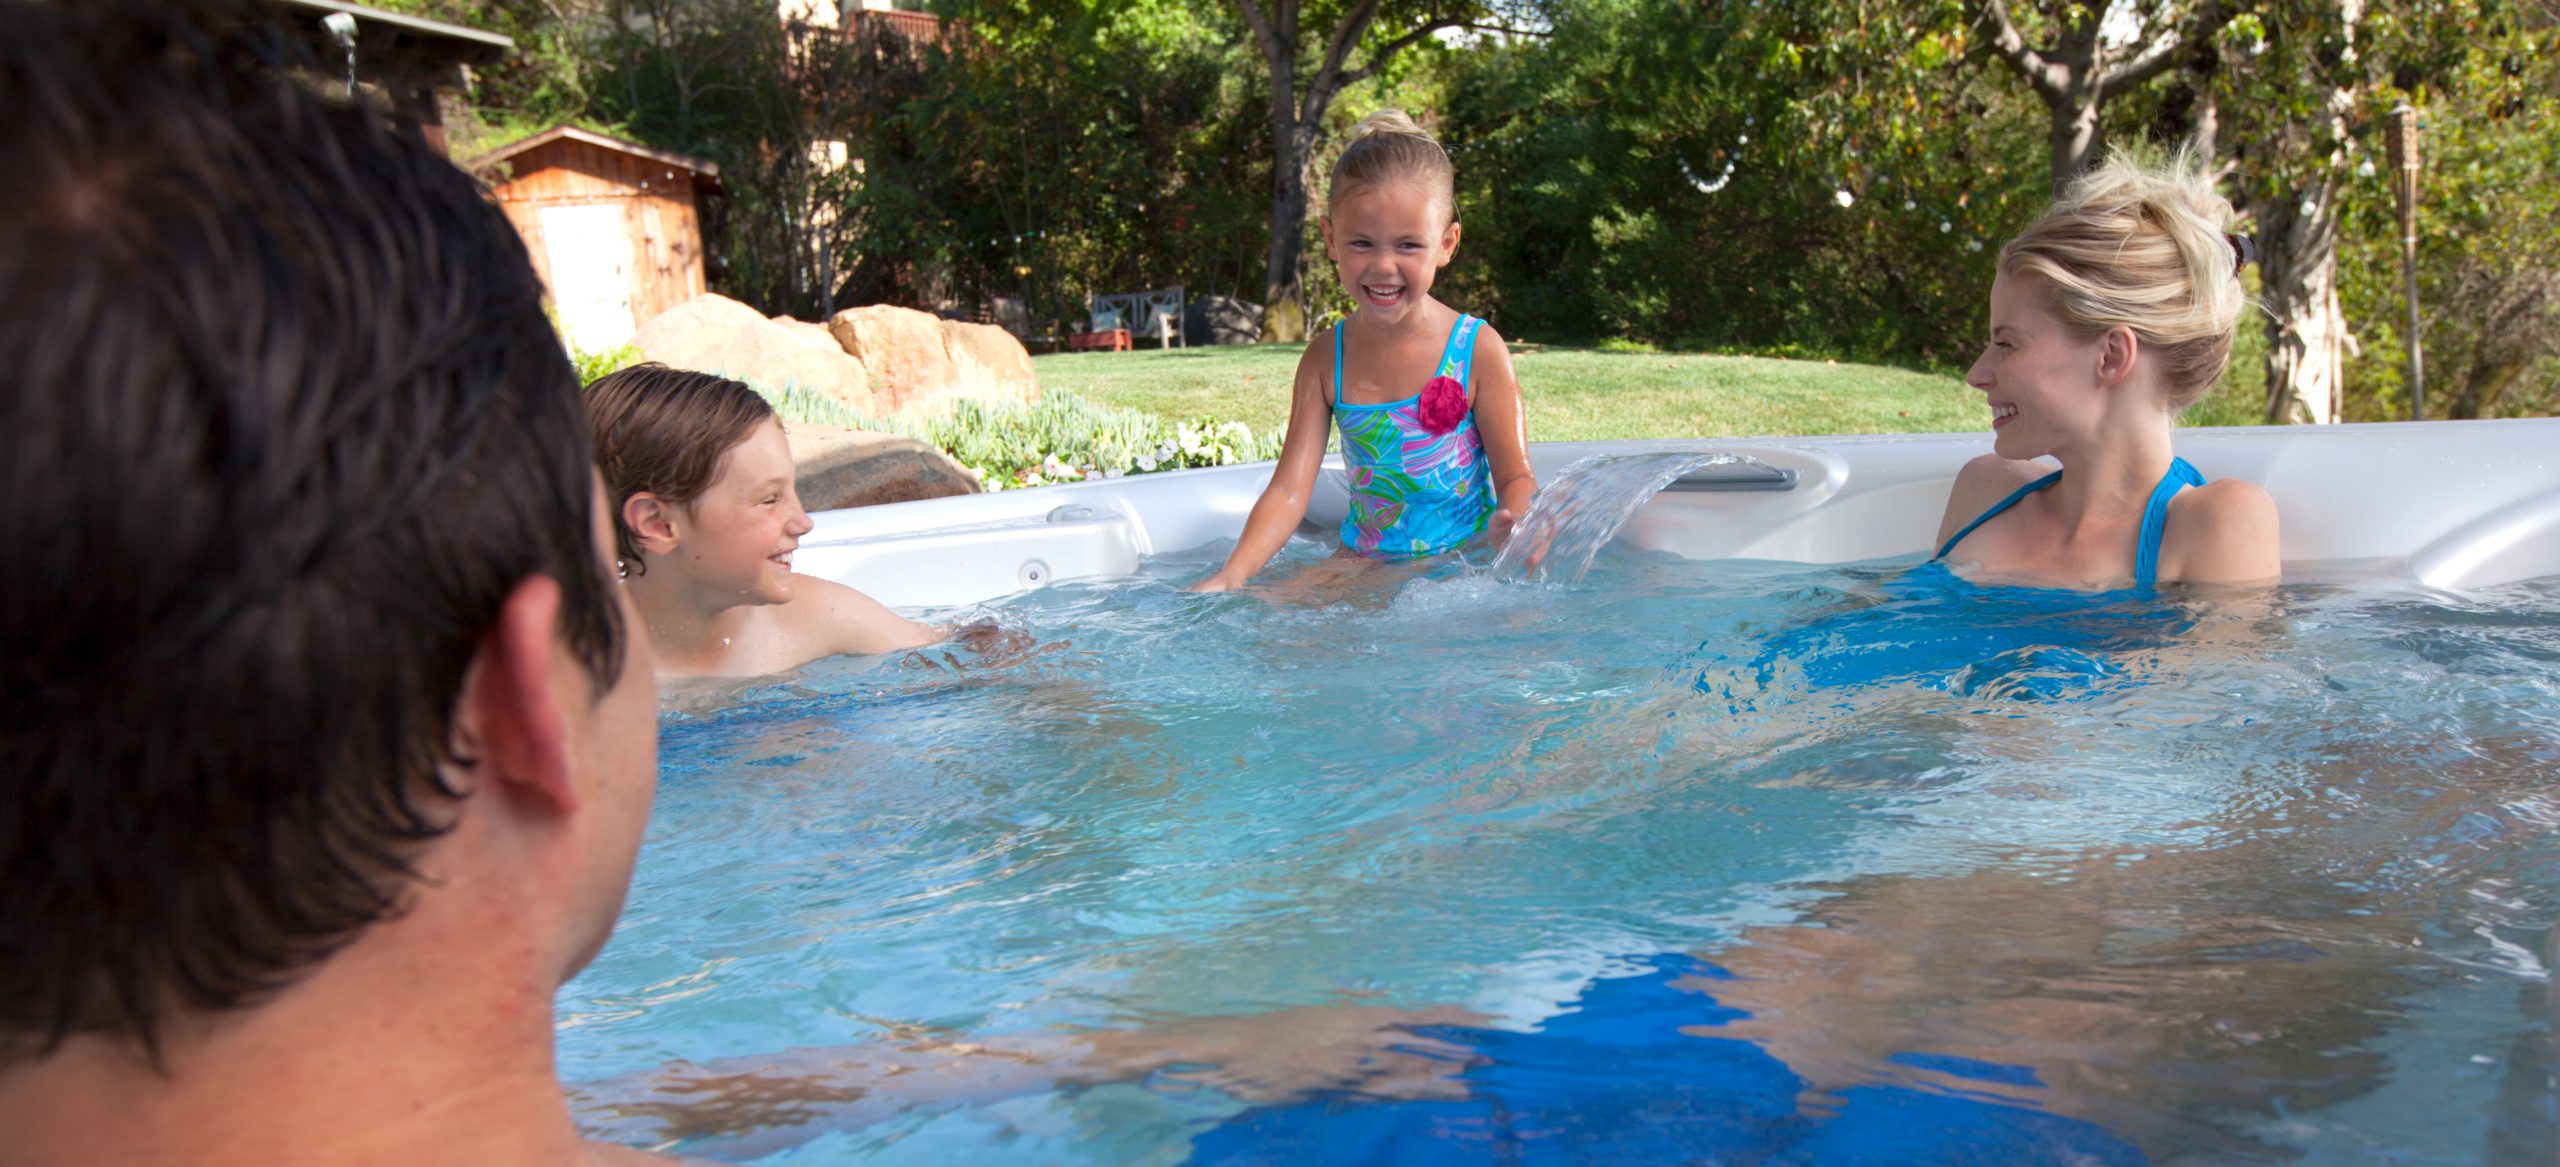 10 Things To Do At Home In Your Hot Tub